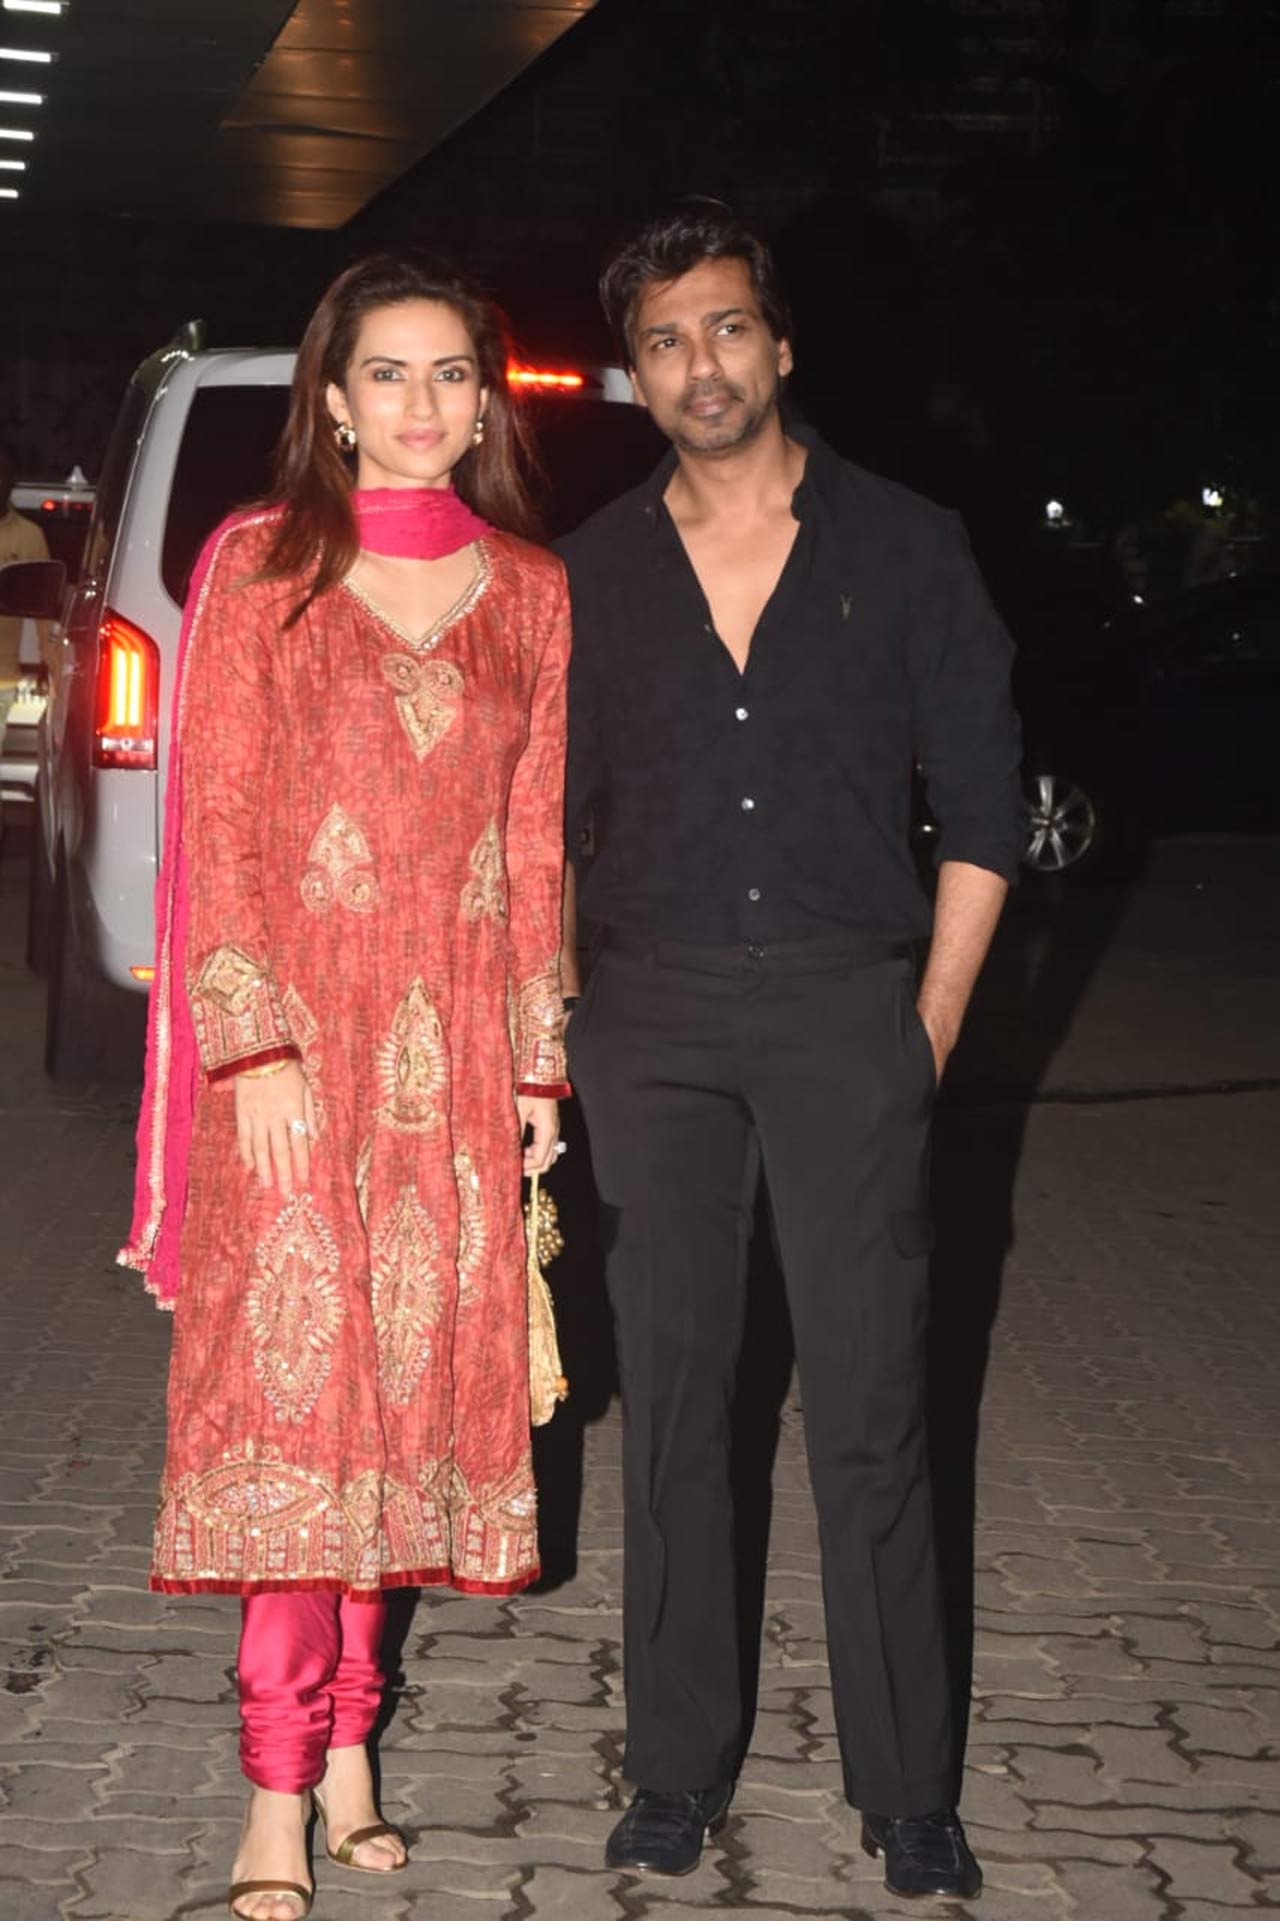 The festival of lights also saw Nikhil Dwivedi and his wife Gaurie Pandit at Sohail Khan's party.